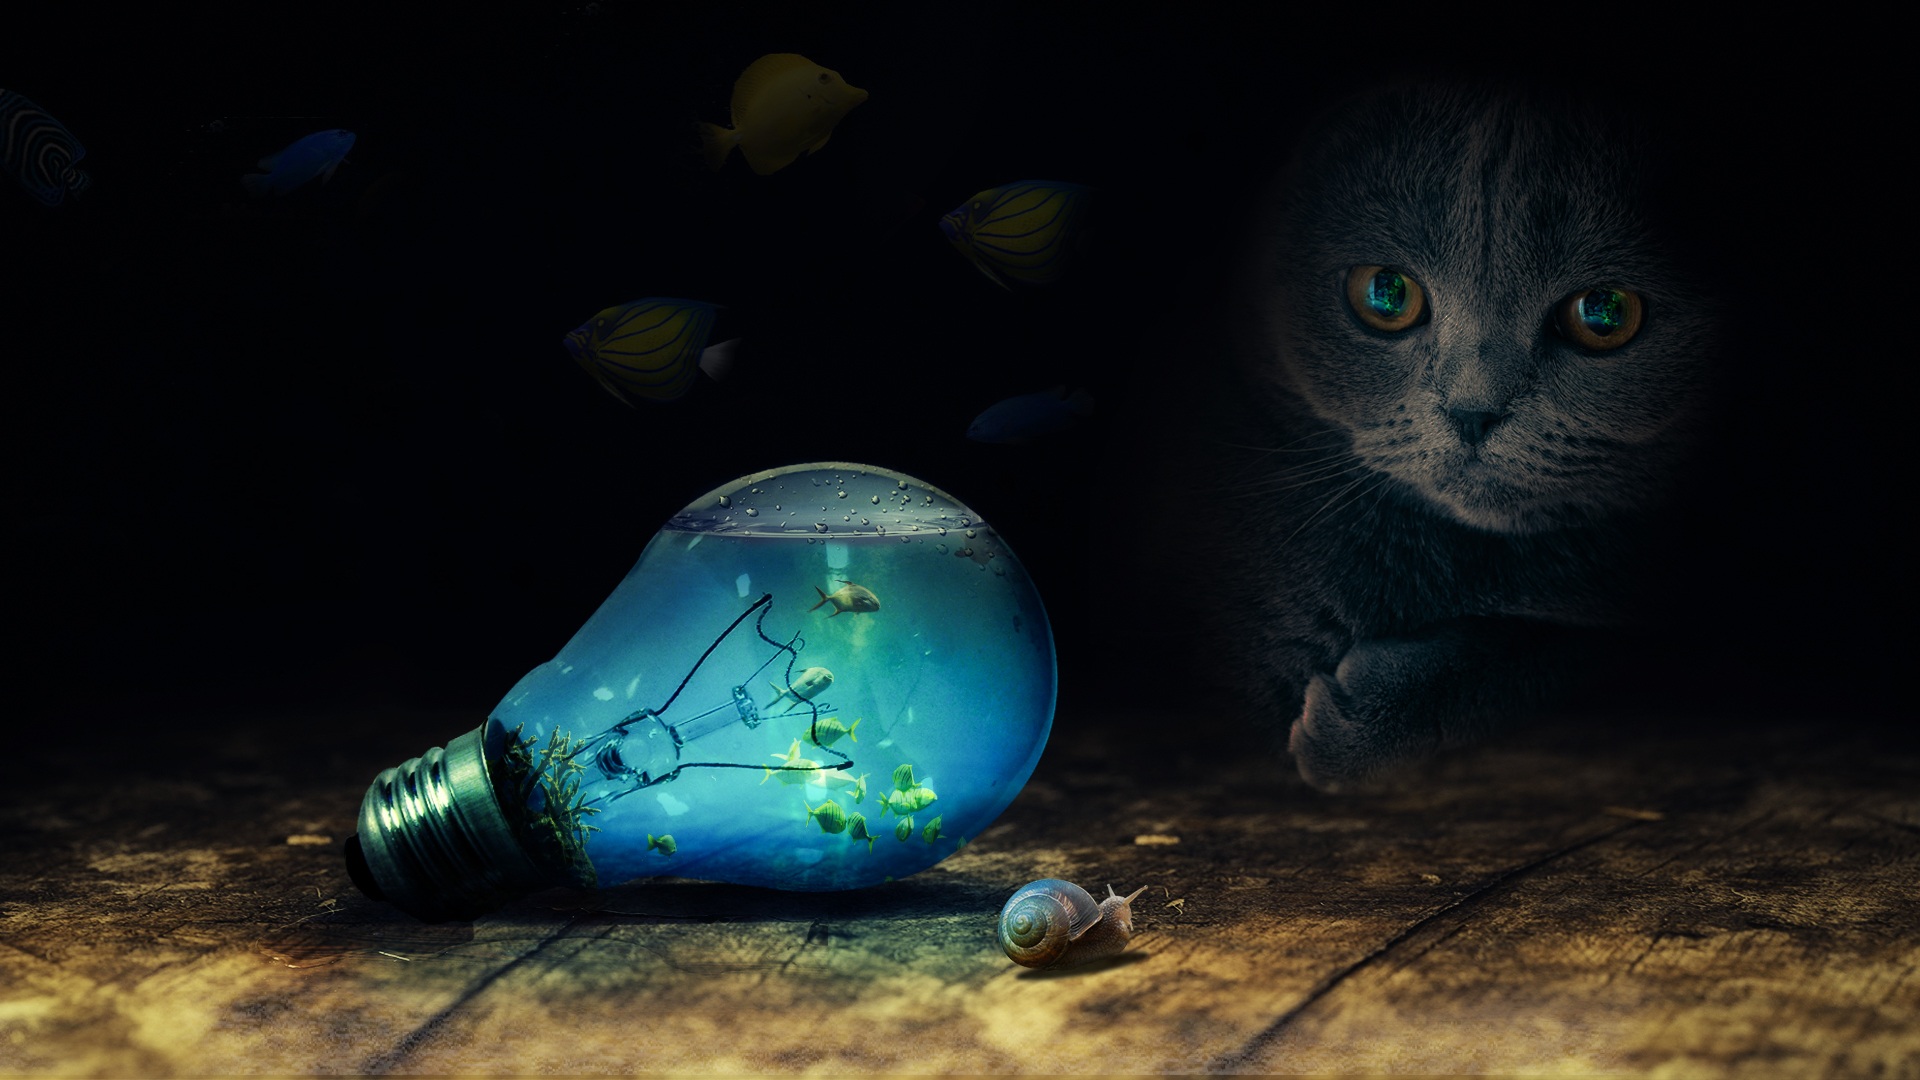 Cat Watching Fish in a Light Bulb by Iván Tamás